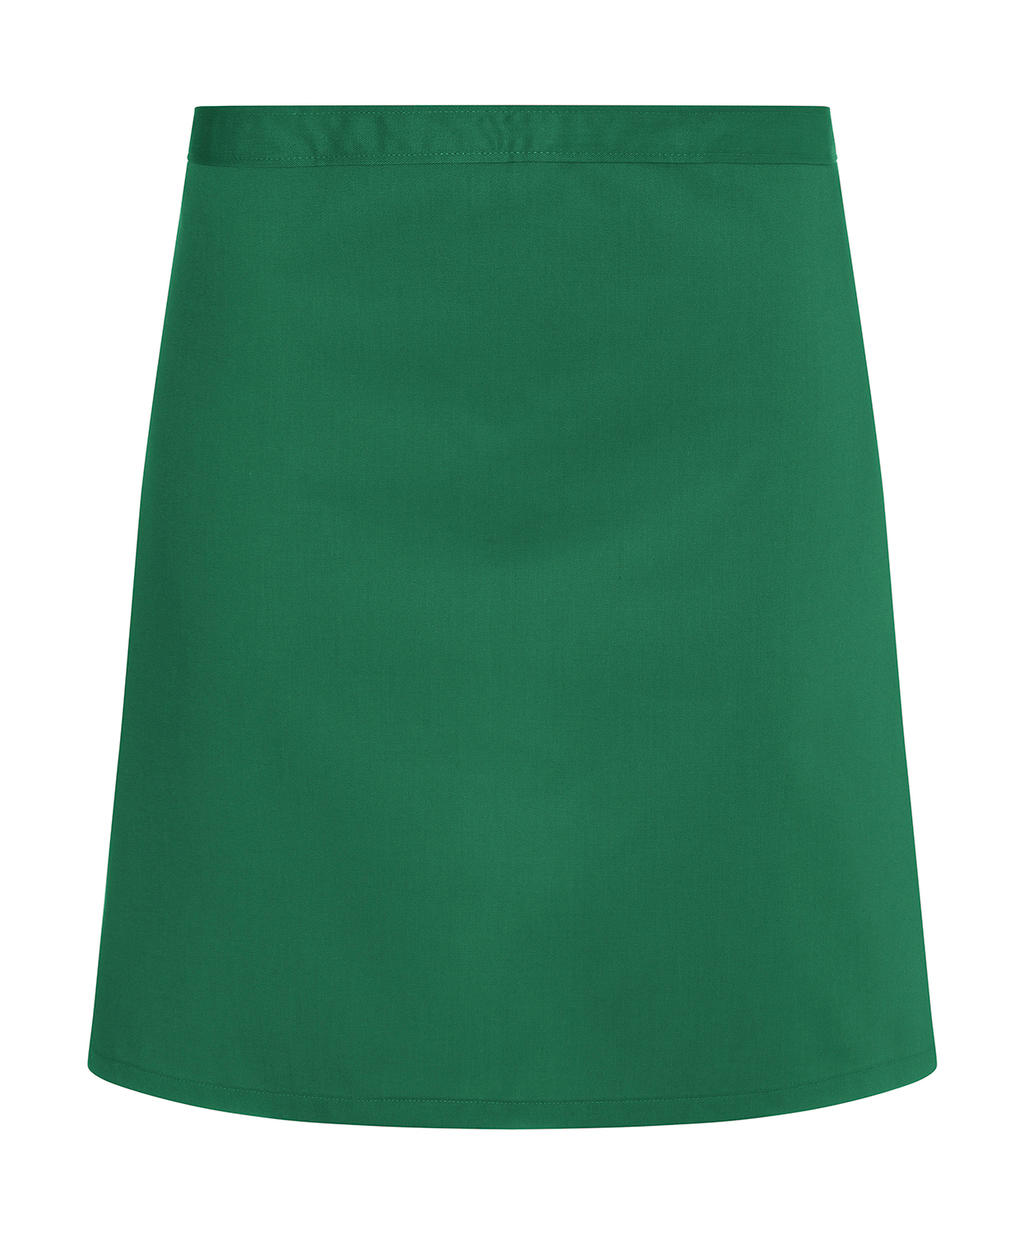  Waist Apron Basic 70 x 55 cm in Farbe Forest Green